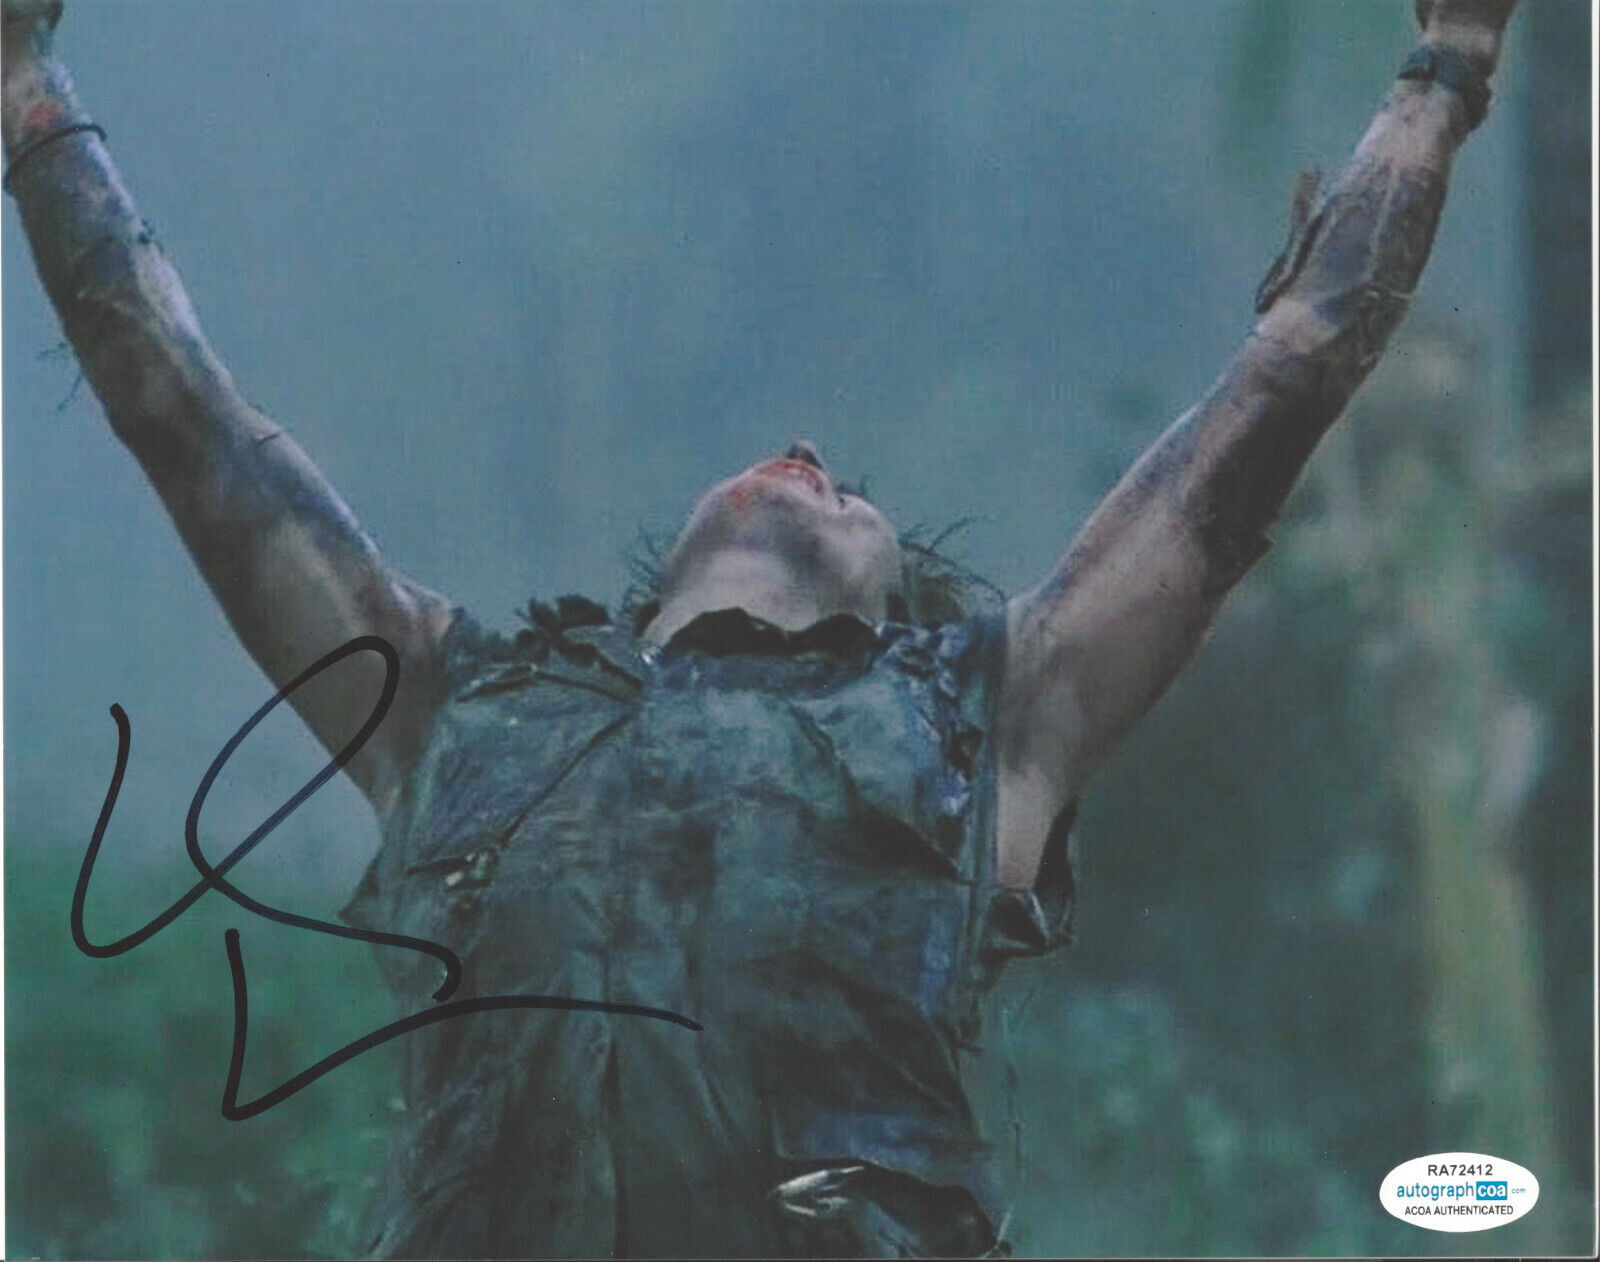 ACTOR WILLEM DAFOE SIGNED AUTHENTIC AUTOGRAPHED 'PLATOON' 8x10 Photo Poster painting ACOA